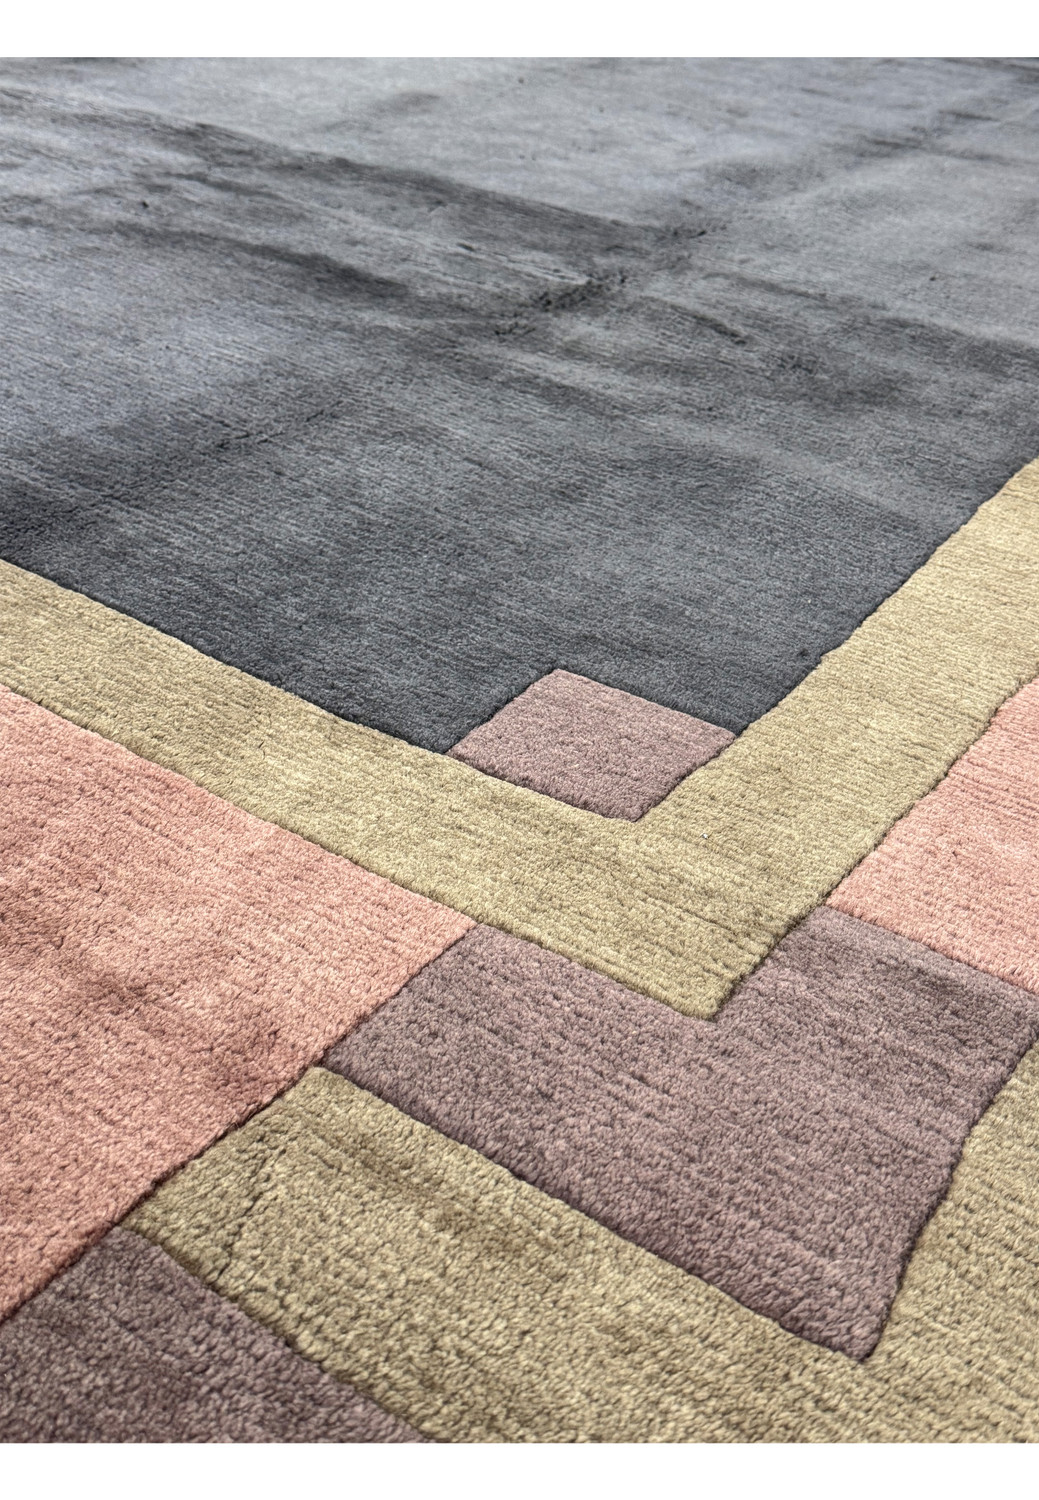 Textured surface of the Modern Tibet Rug in natural light, accentuating the quality weave